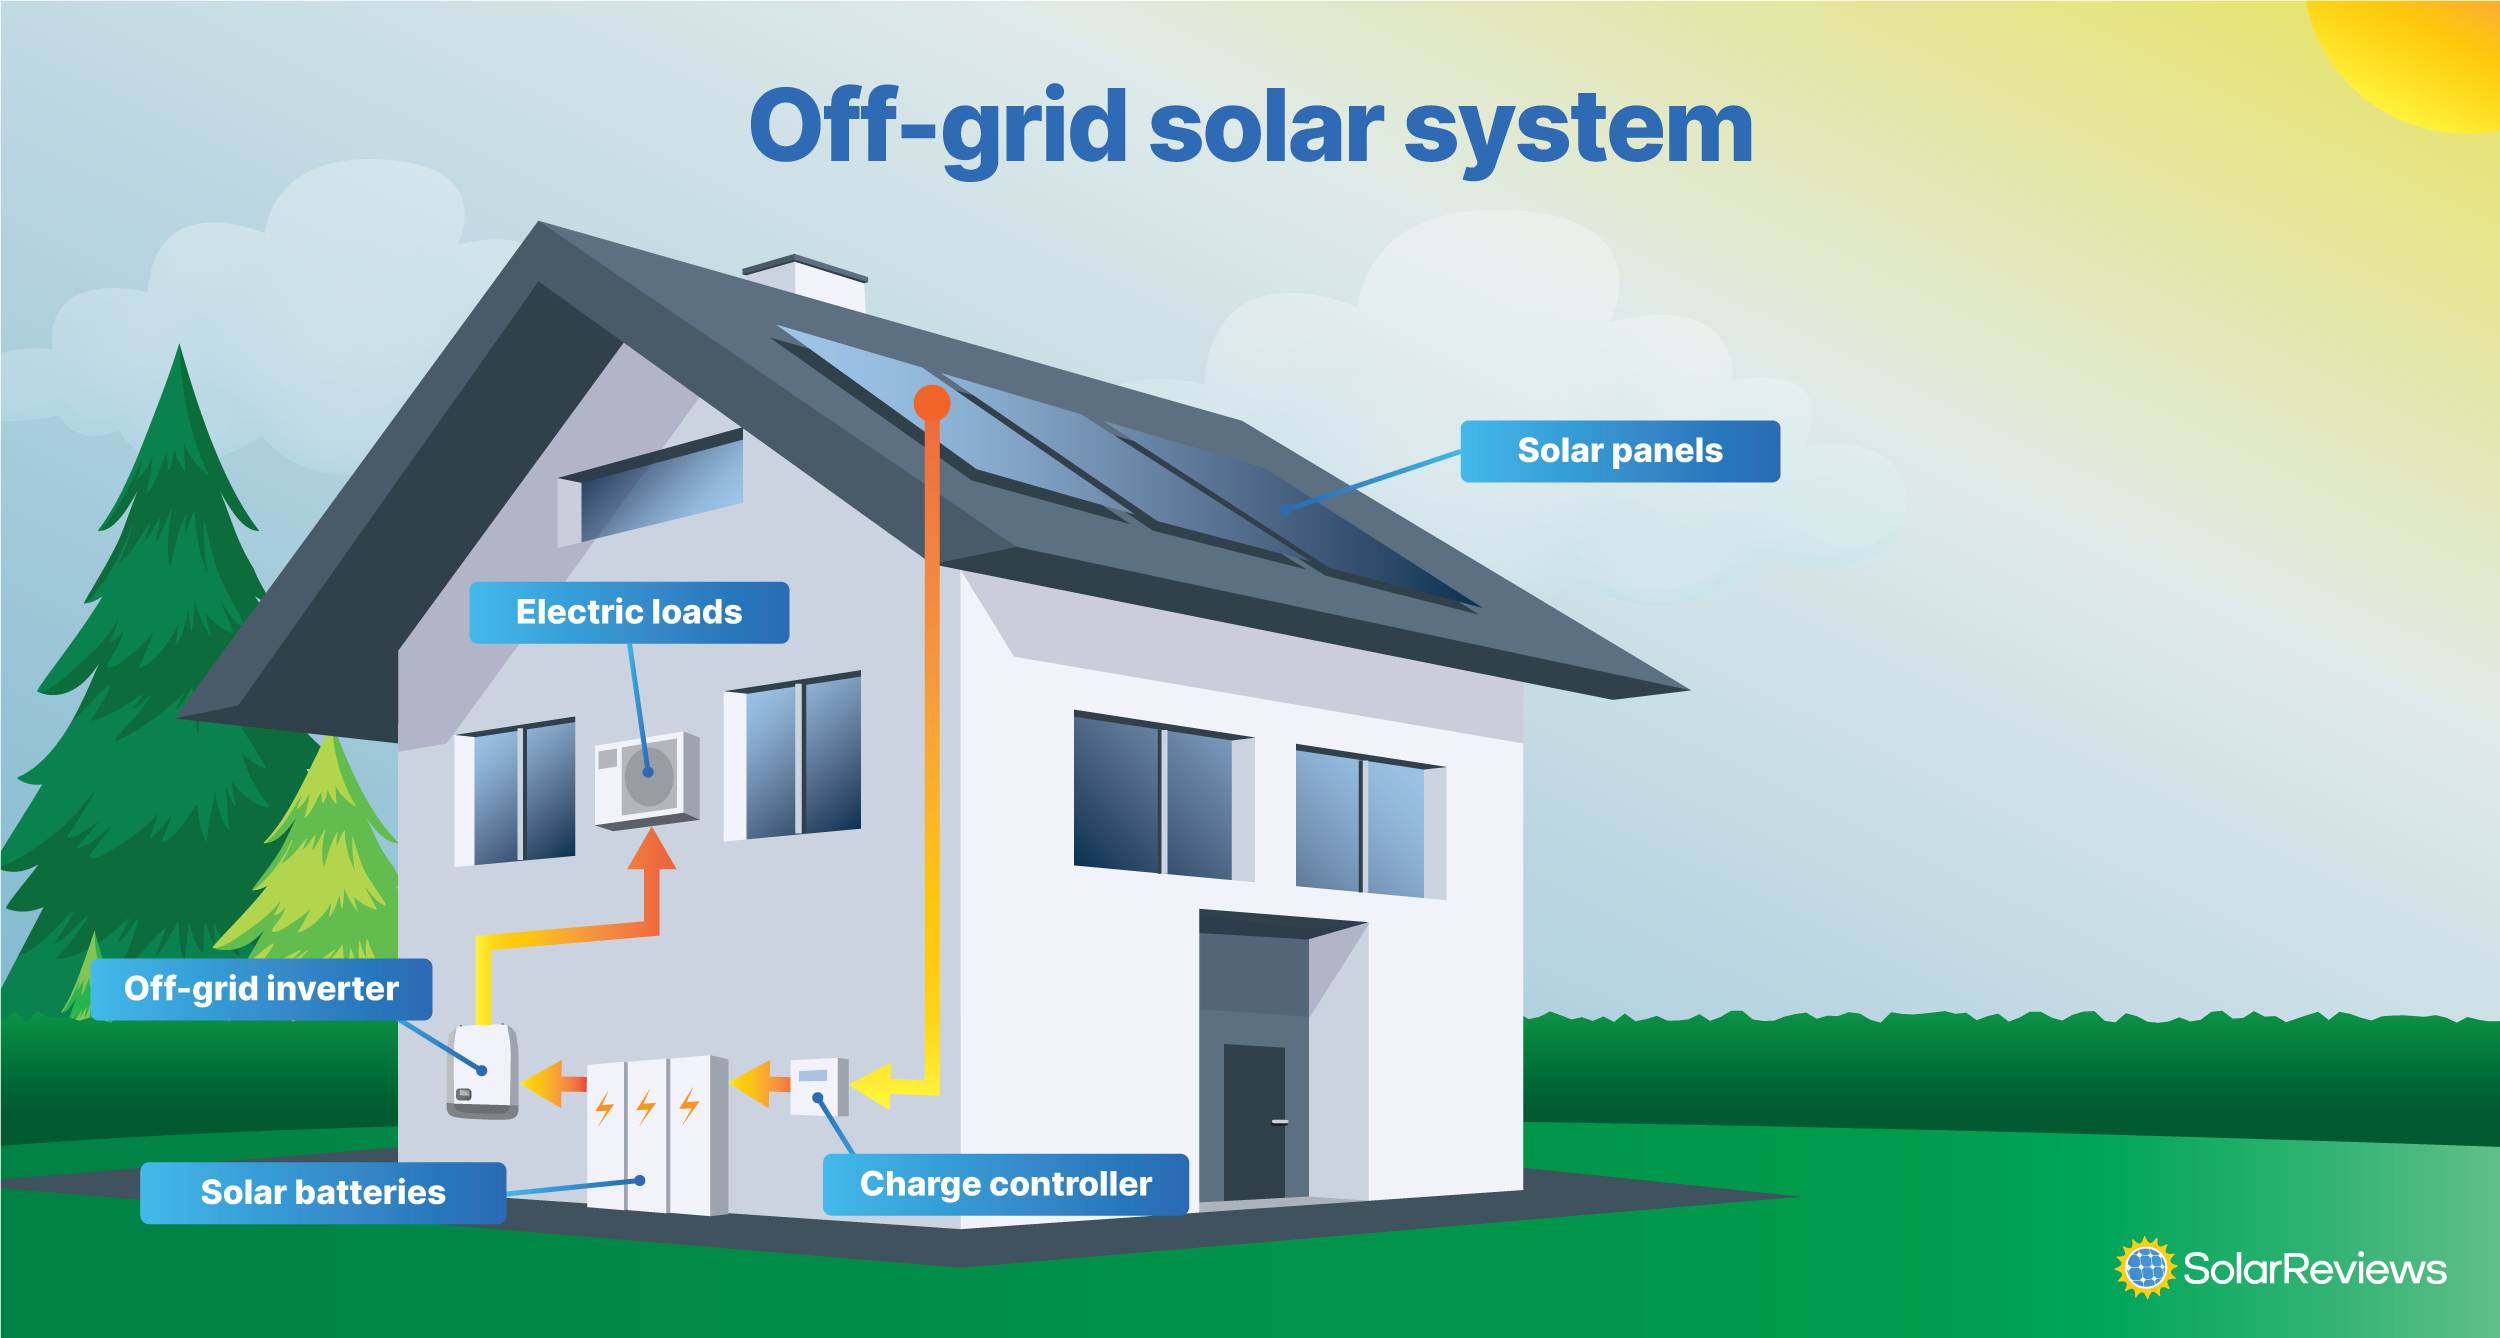 A home with an off-grid solar system. Electricity flows from the solar panels to a charge controller to charge the home's battery system. When the home takes electricity from the batteries, it sends the power to the off-grid inverter that runs the appliances.